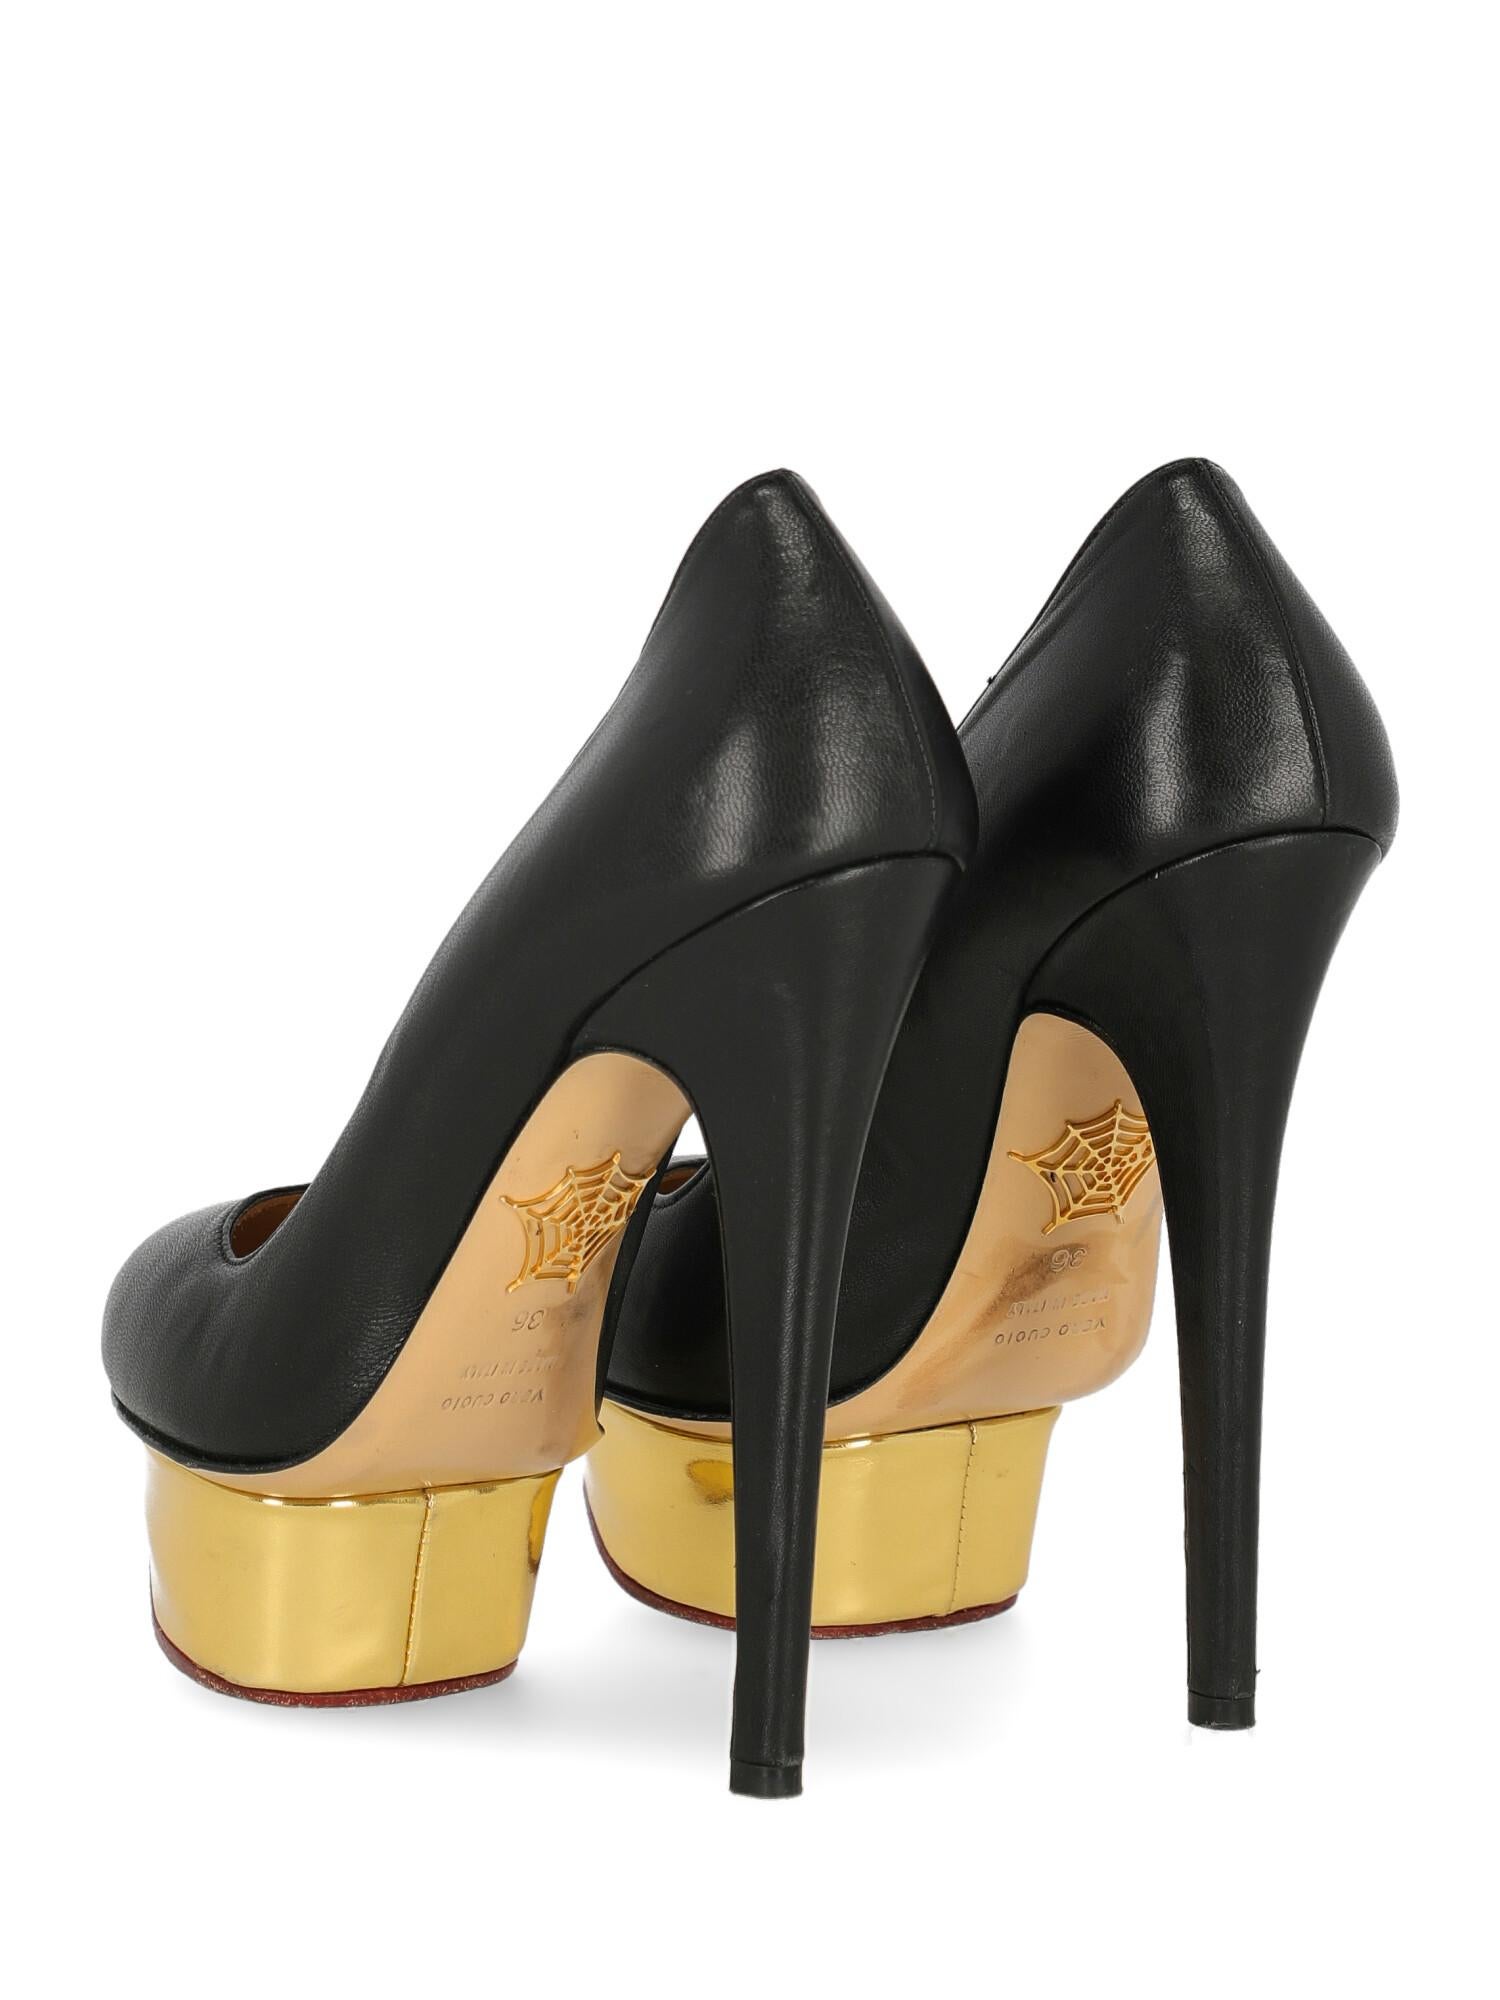 Women's Charlotte Olympia Woman Pumps Black Leather IT 36 For Sale